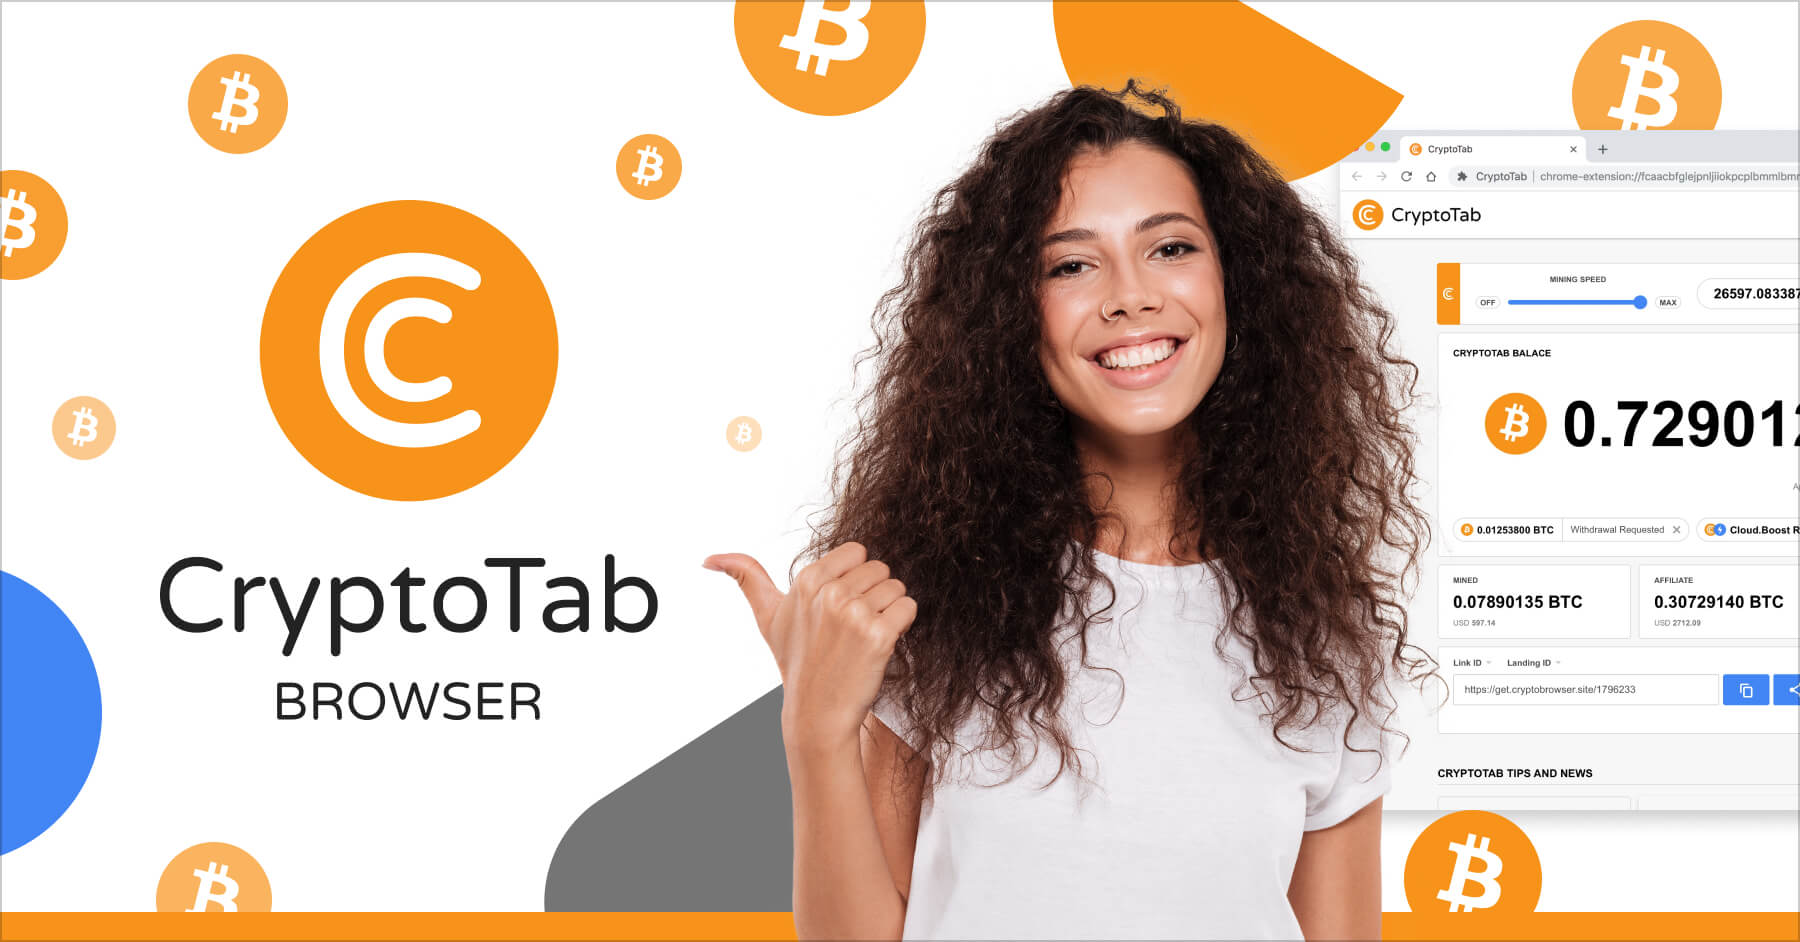 How to download CryptoTab